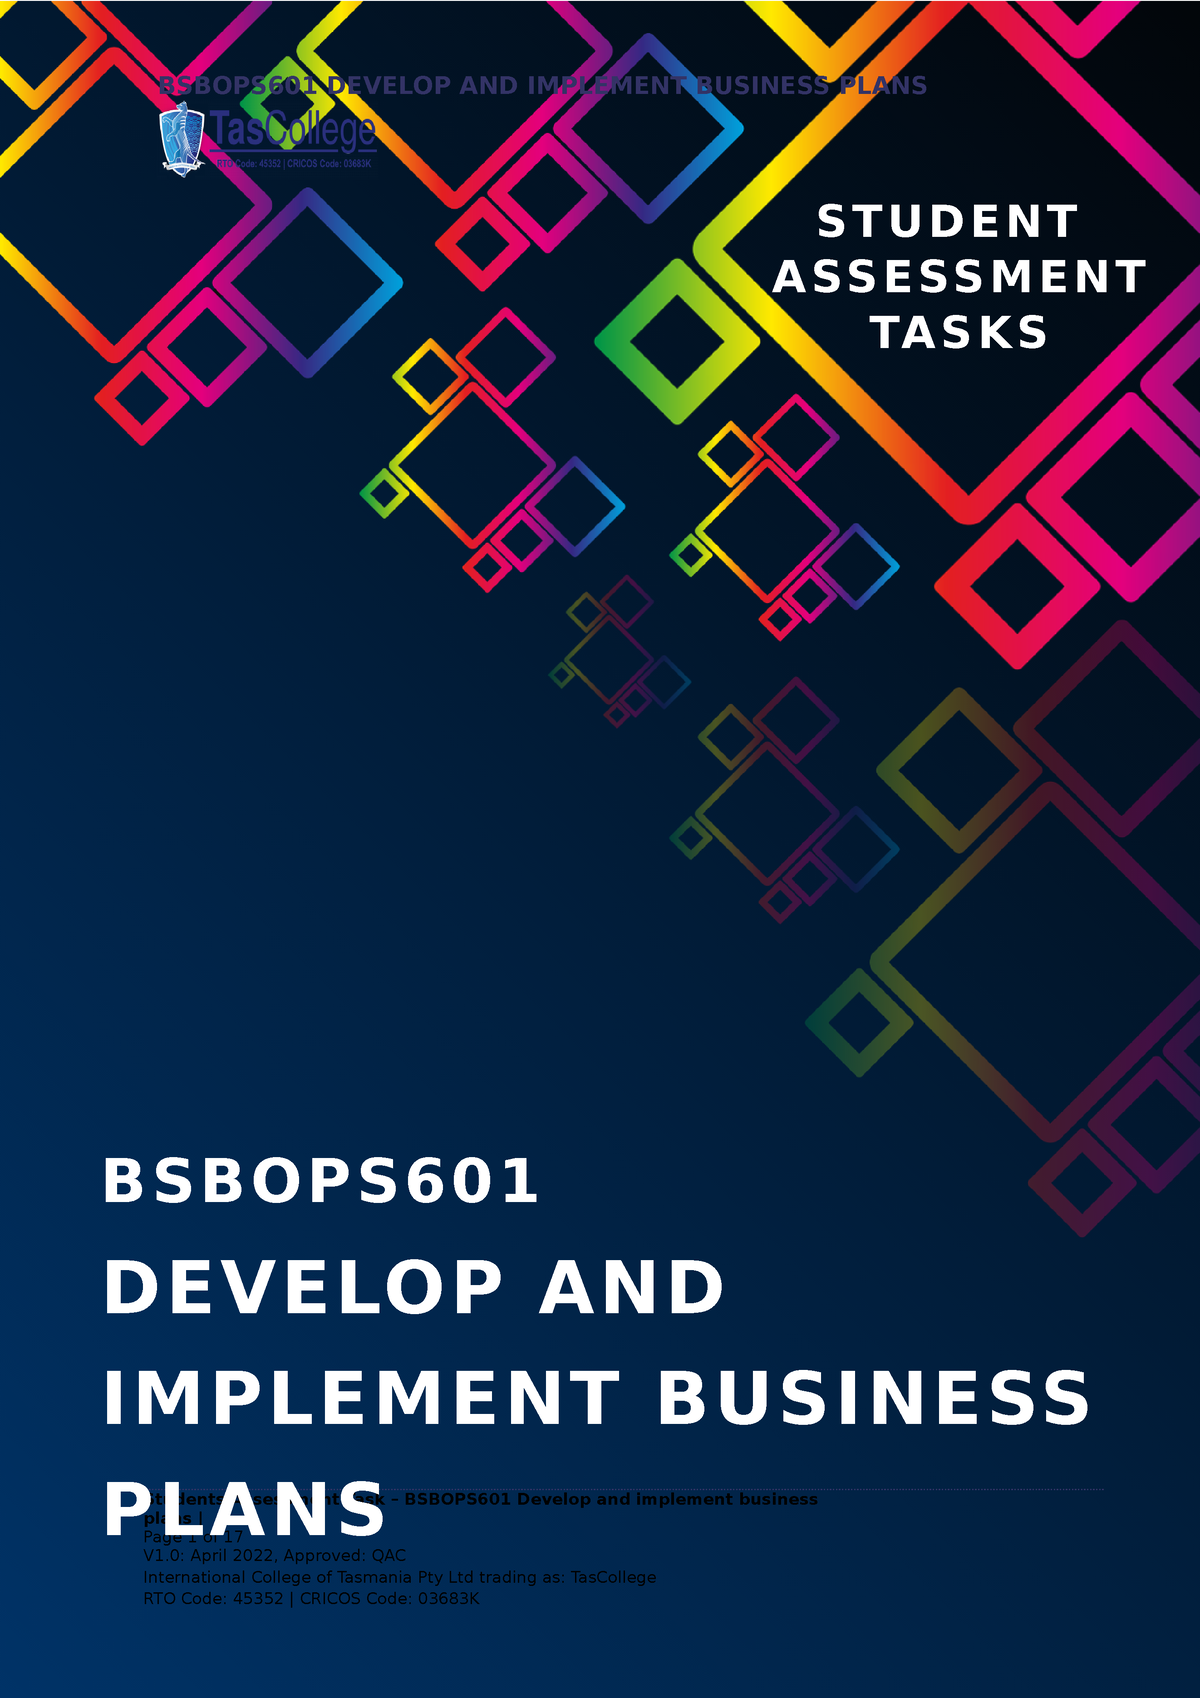 bsbops601 develop and implement a business plan